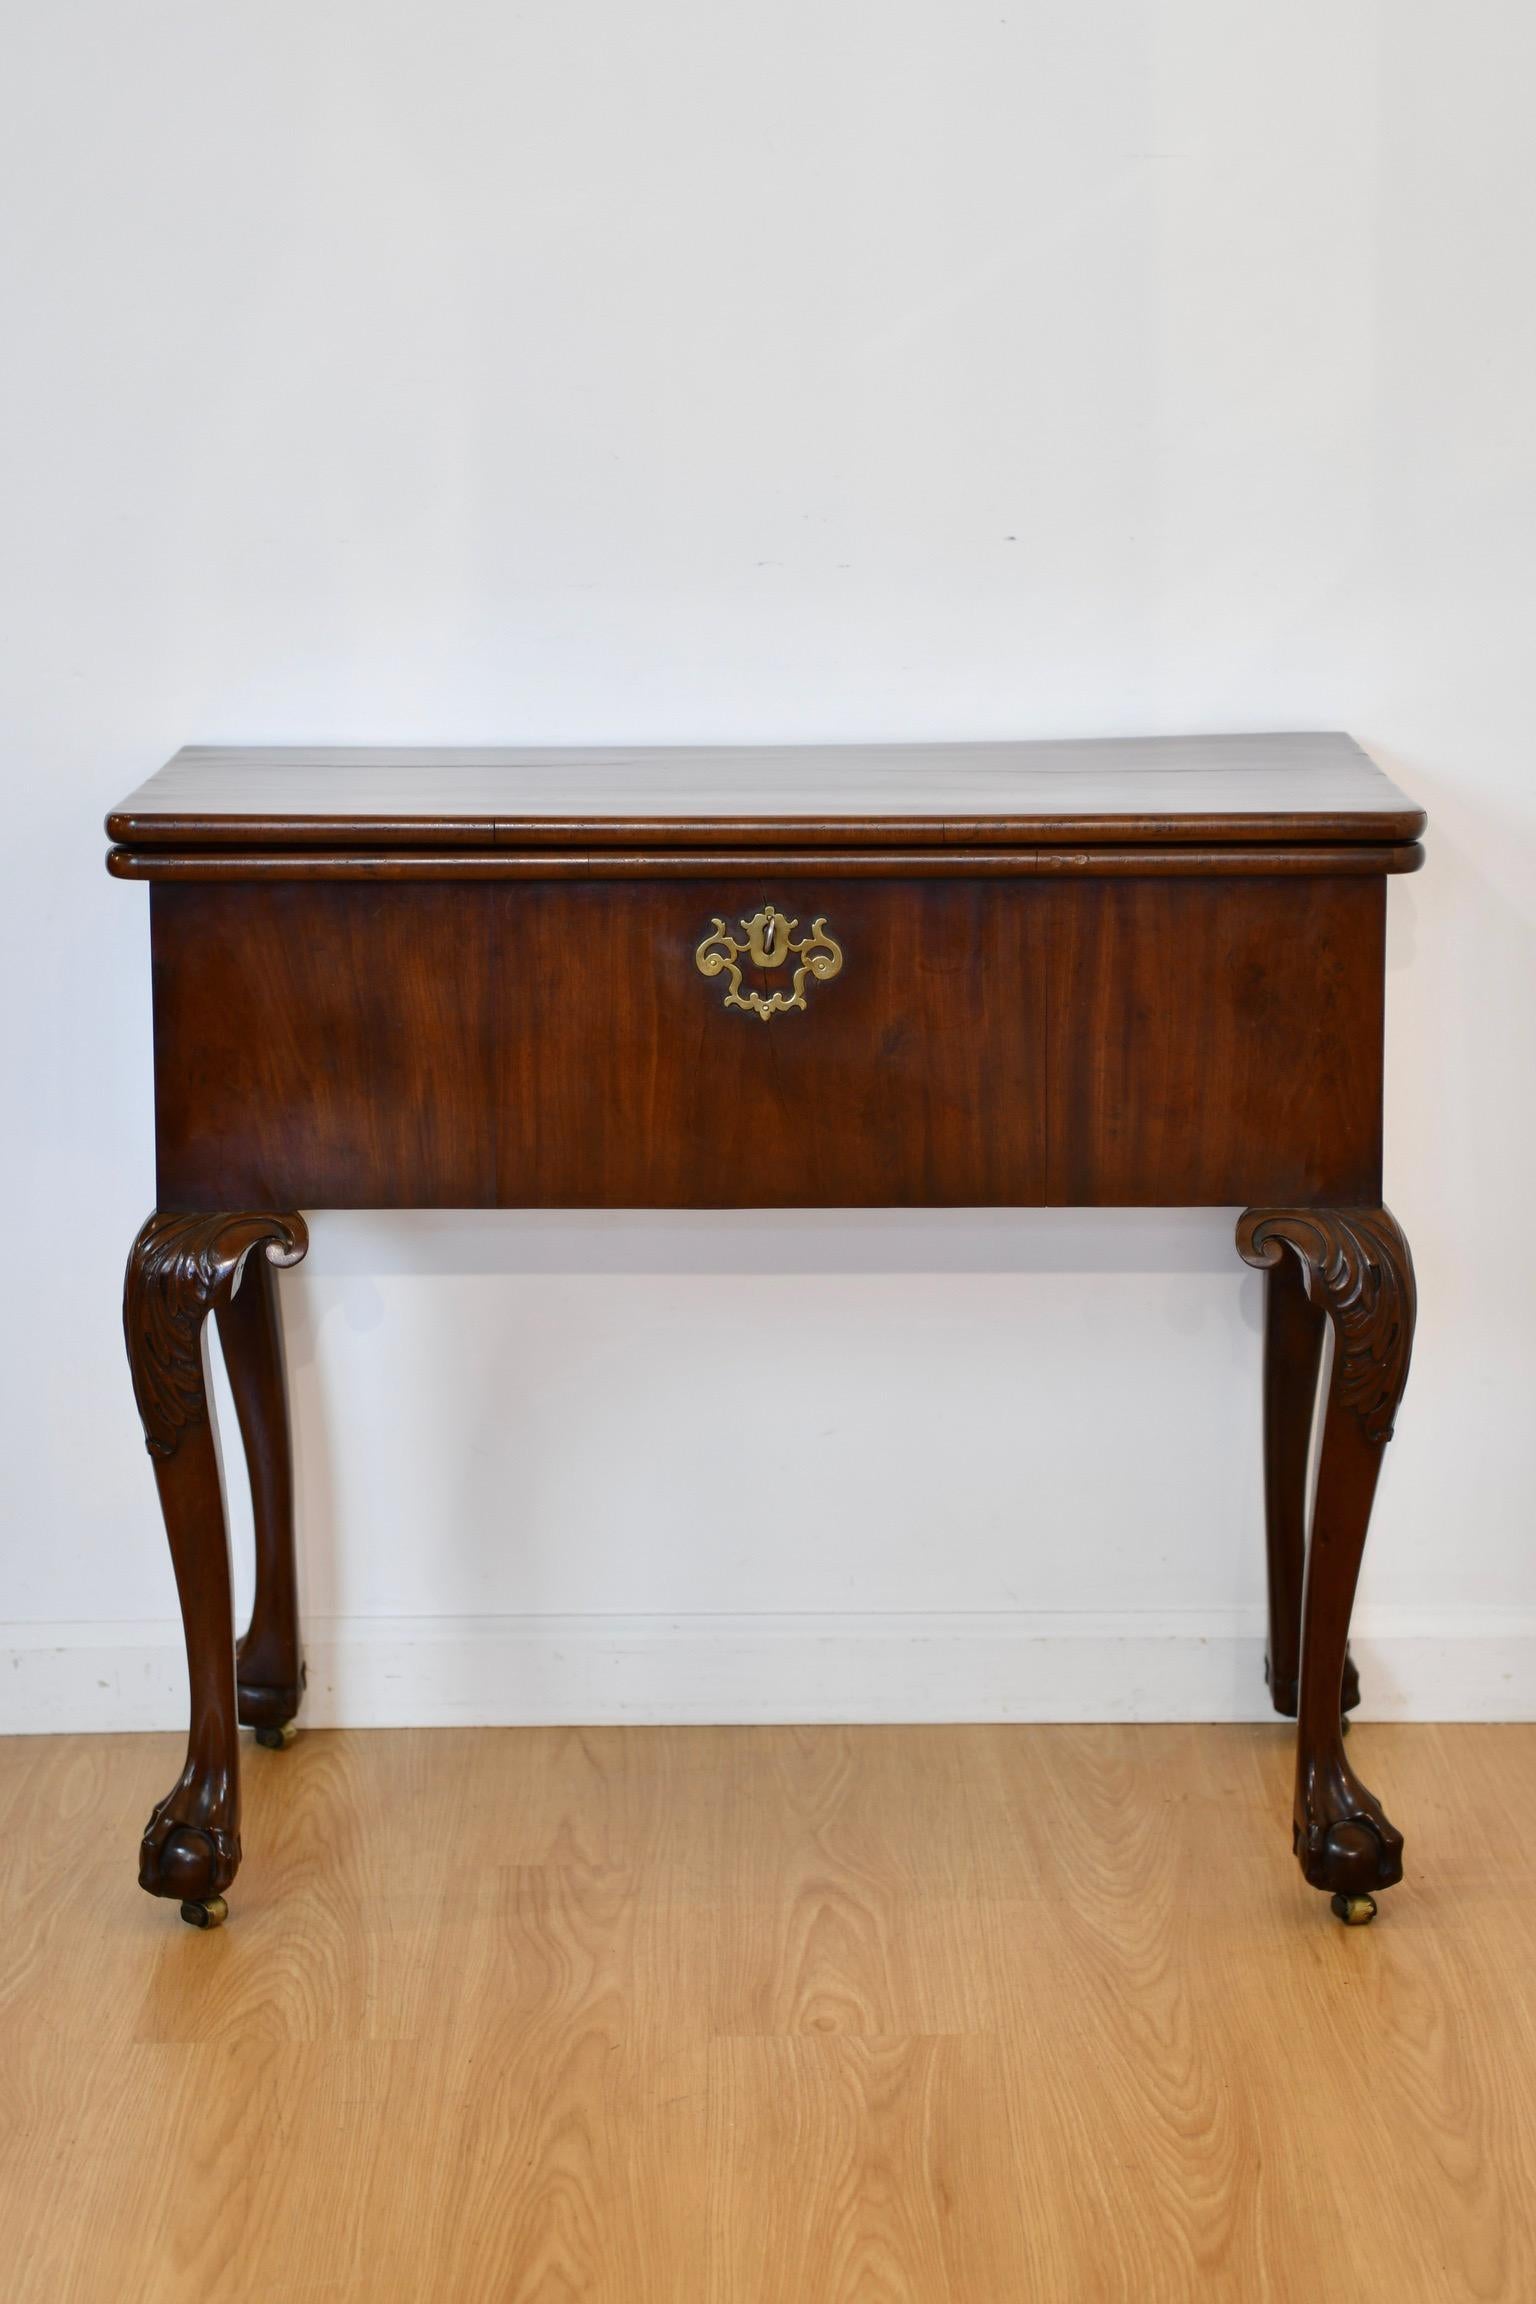 Georgian revival harlequin mechanical transforming desk that, when closed, is in the form of console table. When opened and the back legs extended, the table becomes a games table with salmon pink suede inset surface. When games surface is folded,